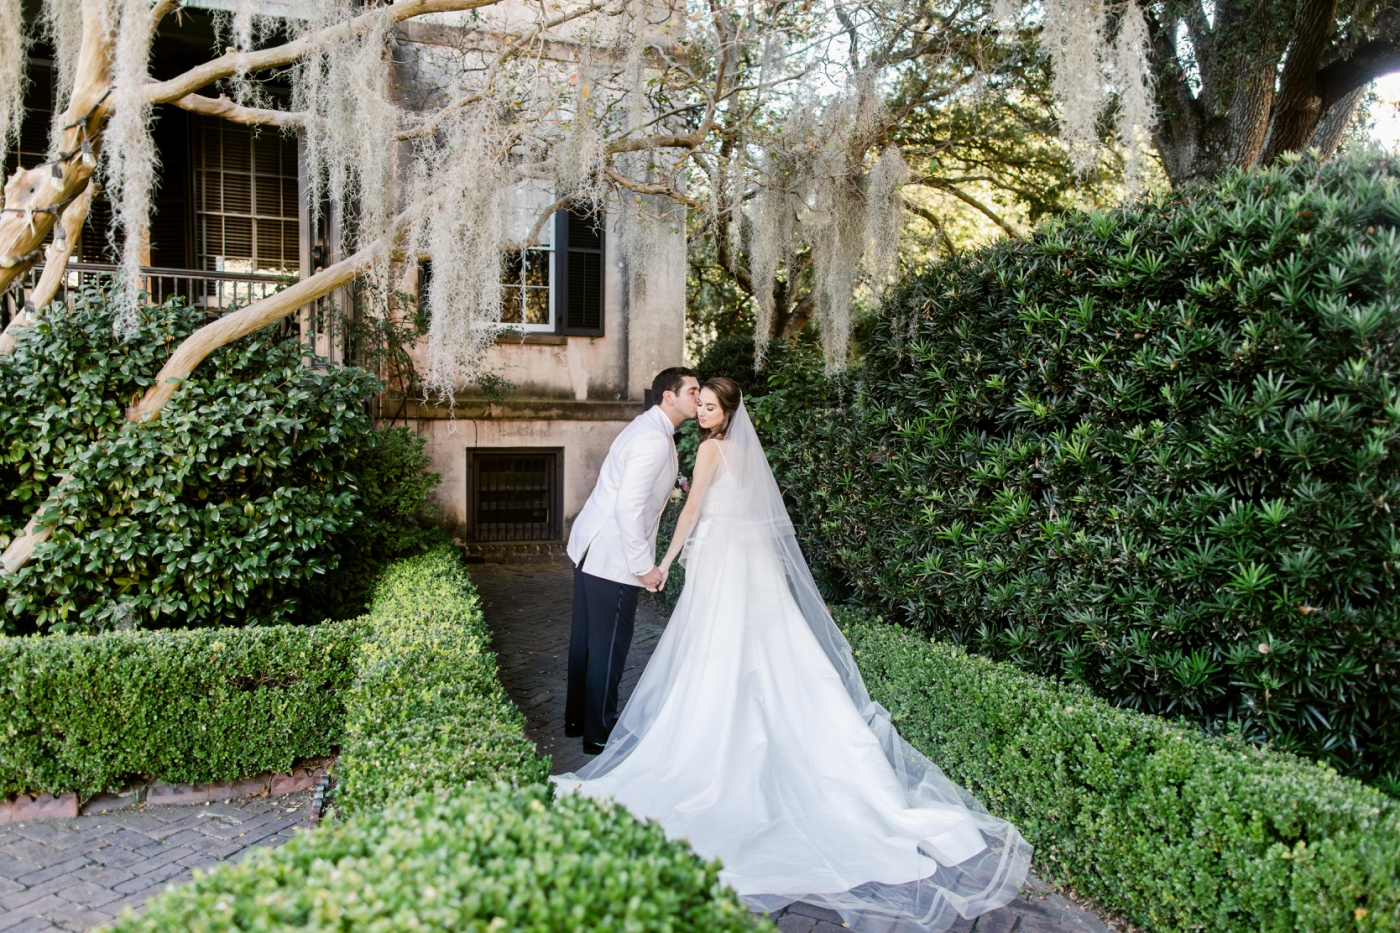 bride and groom portraits at Harper Fowlkes House